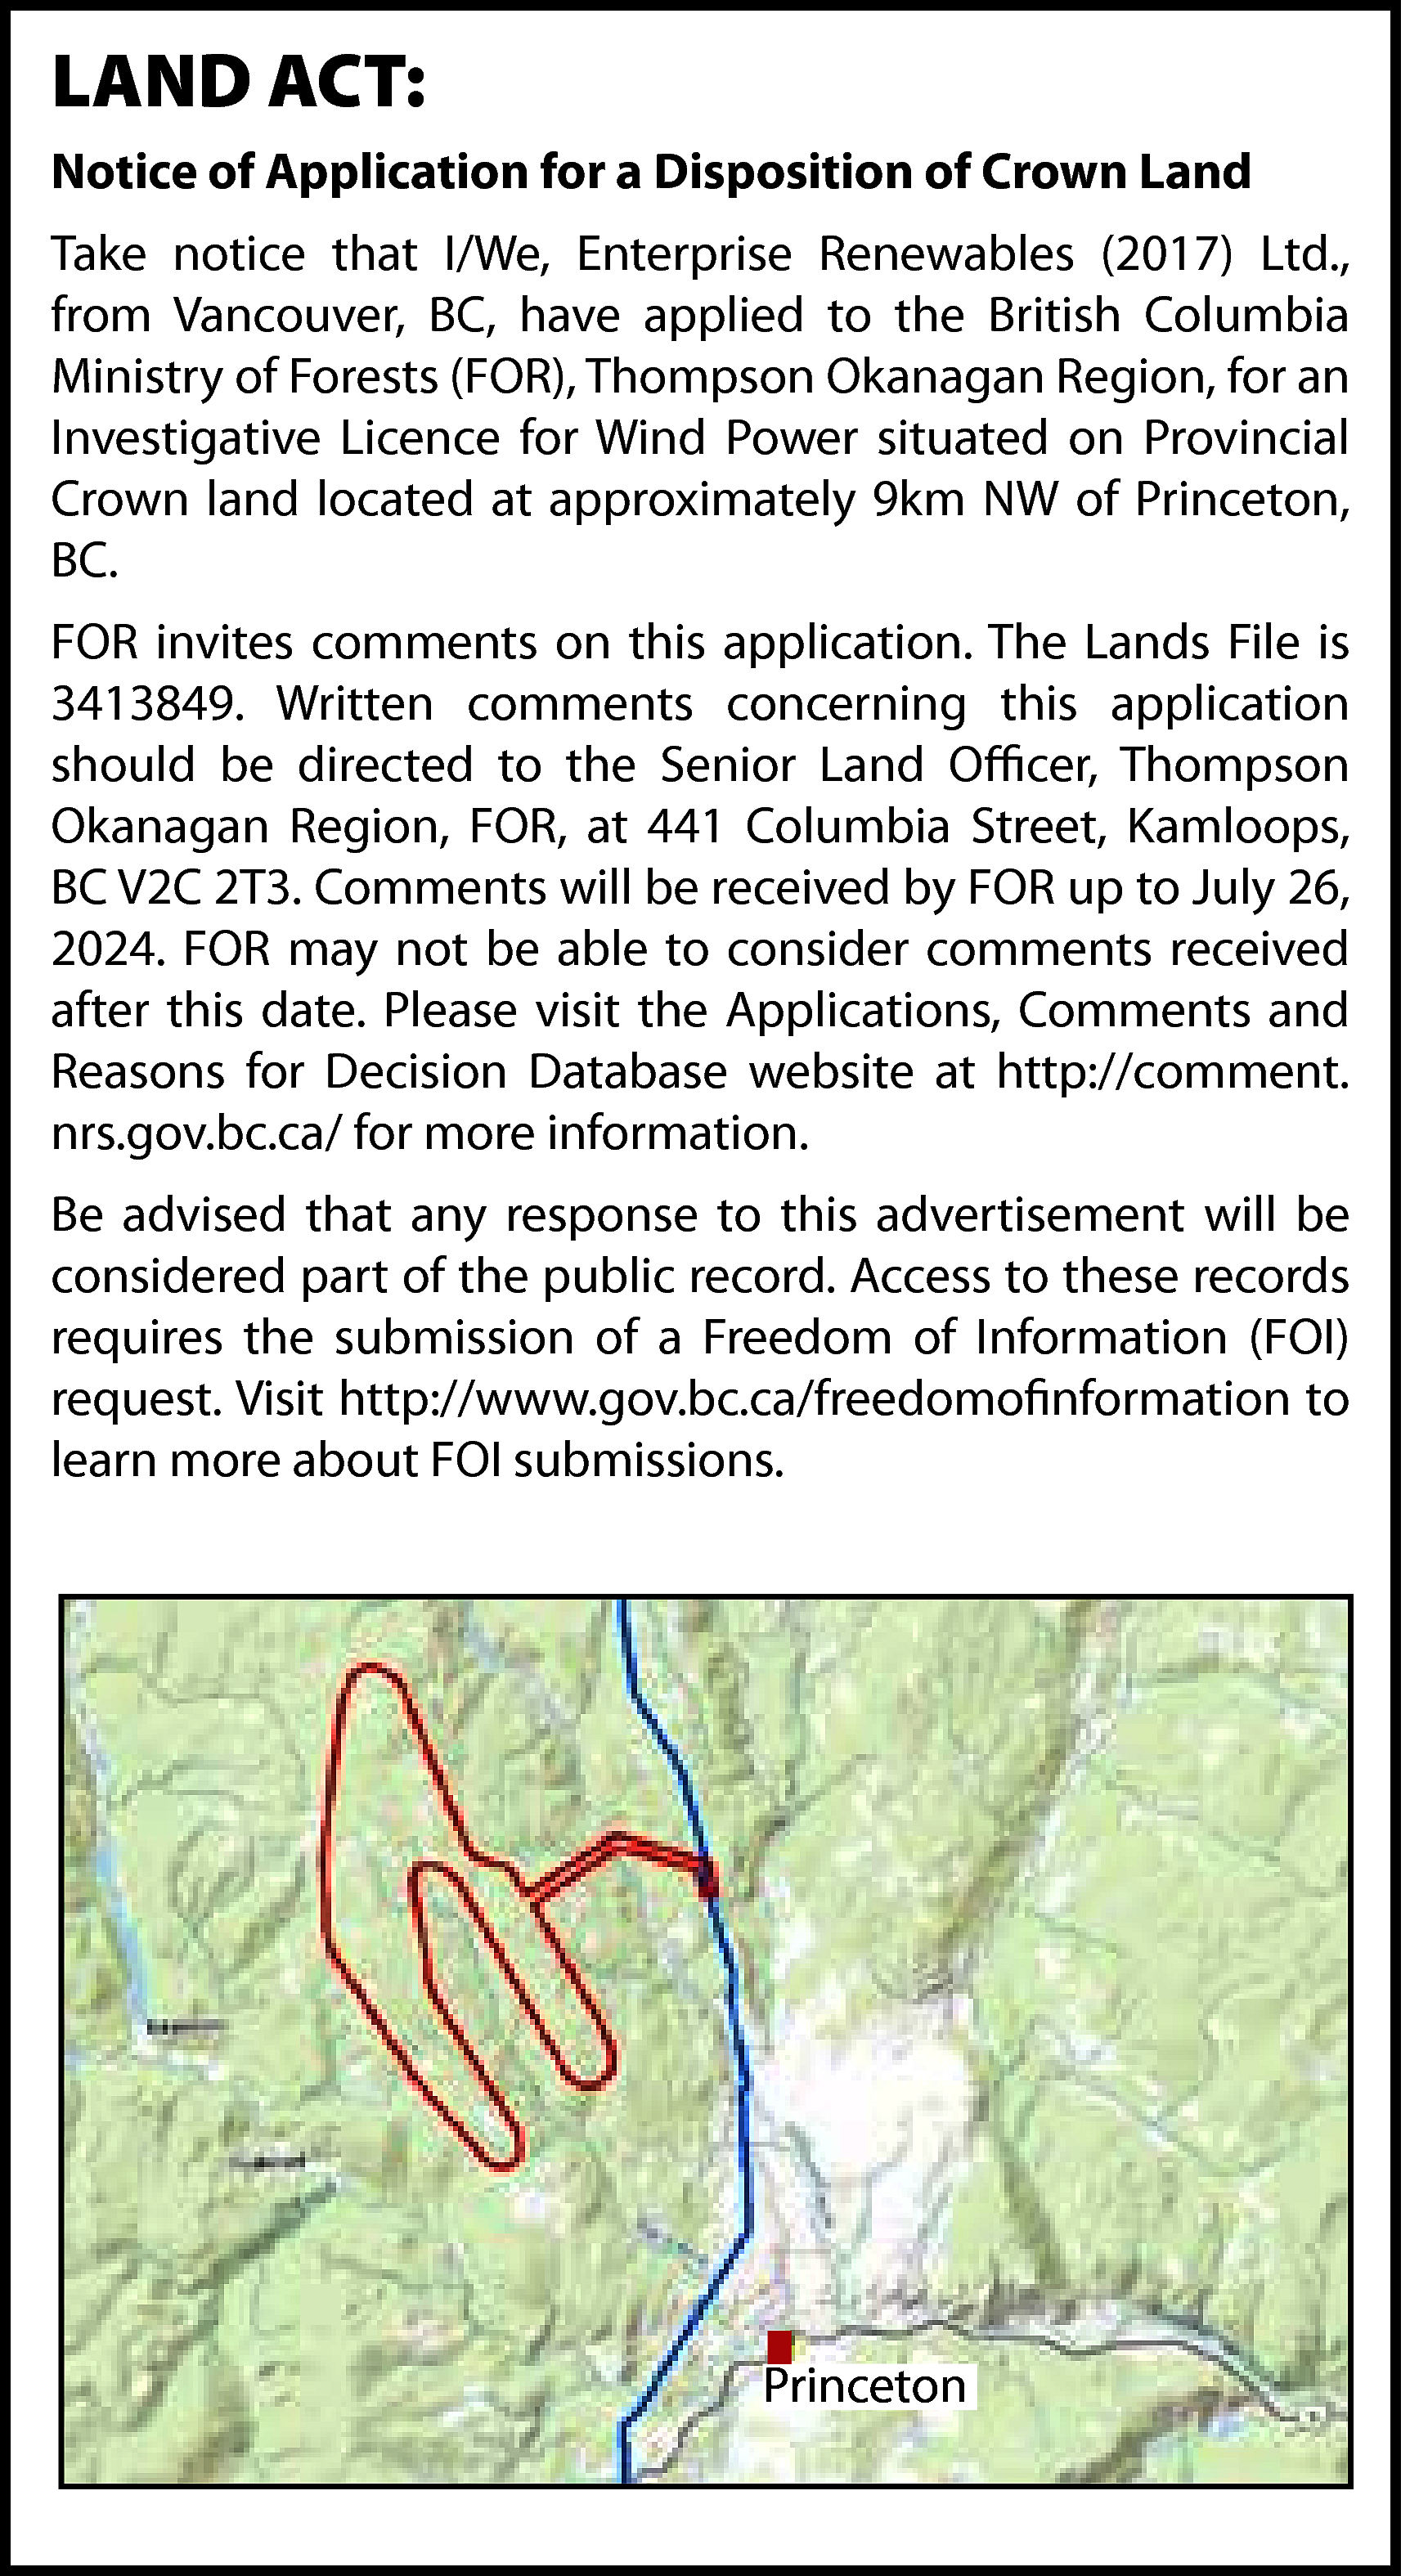 LAND ACT: <br>Notice of Application  LAND ACT:  Notice of Application for a Disposition of Crown Land  Take notice that I/We, Enterprise Renewables (2017) Ltd.,  from Vancouver, BC, have applied to the British Columbia  Ministry of Forests (FOR), Thompson Okanagan Region, for an  Investigative Licence for Wind Power situated on Provincial  Crown land located at approximately 9km NW of Princeton,  BC.  FOR invites comments on this application. The Lands File is  3413849. Written comments concerning this application  should be directed to the Senior Land Officer, Thompson  Okanagan Region, FOR, at 441 Columbia Street, Kamloops,  BC V2C 2T3. Comments will be received by FOR up to July 26,  2024. FOR may not be able to consider comments received  after this date. Please visit the Applications, Comments and  Reasons for Decision Database website at http://comment.  nrs.gov.bc.ca/ for more information.  Be advised that any response to this advertisement will be  considered part of the public record. Access to these records  requires the submission of a Freedom of Information (FOI)  request. Visit http://www.gov.bc.ca/freedomofinformation to  learn more about FOI submissions.    Princeton    